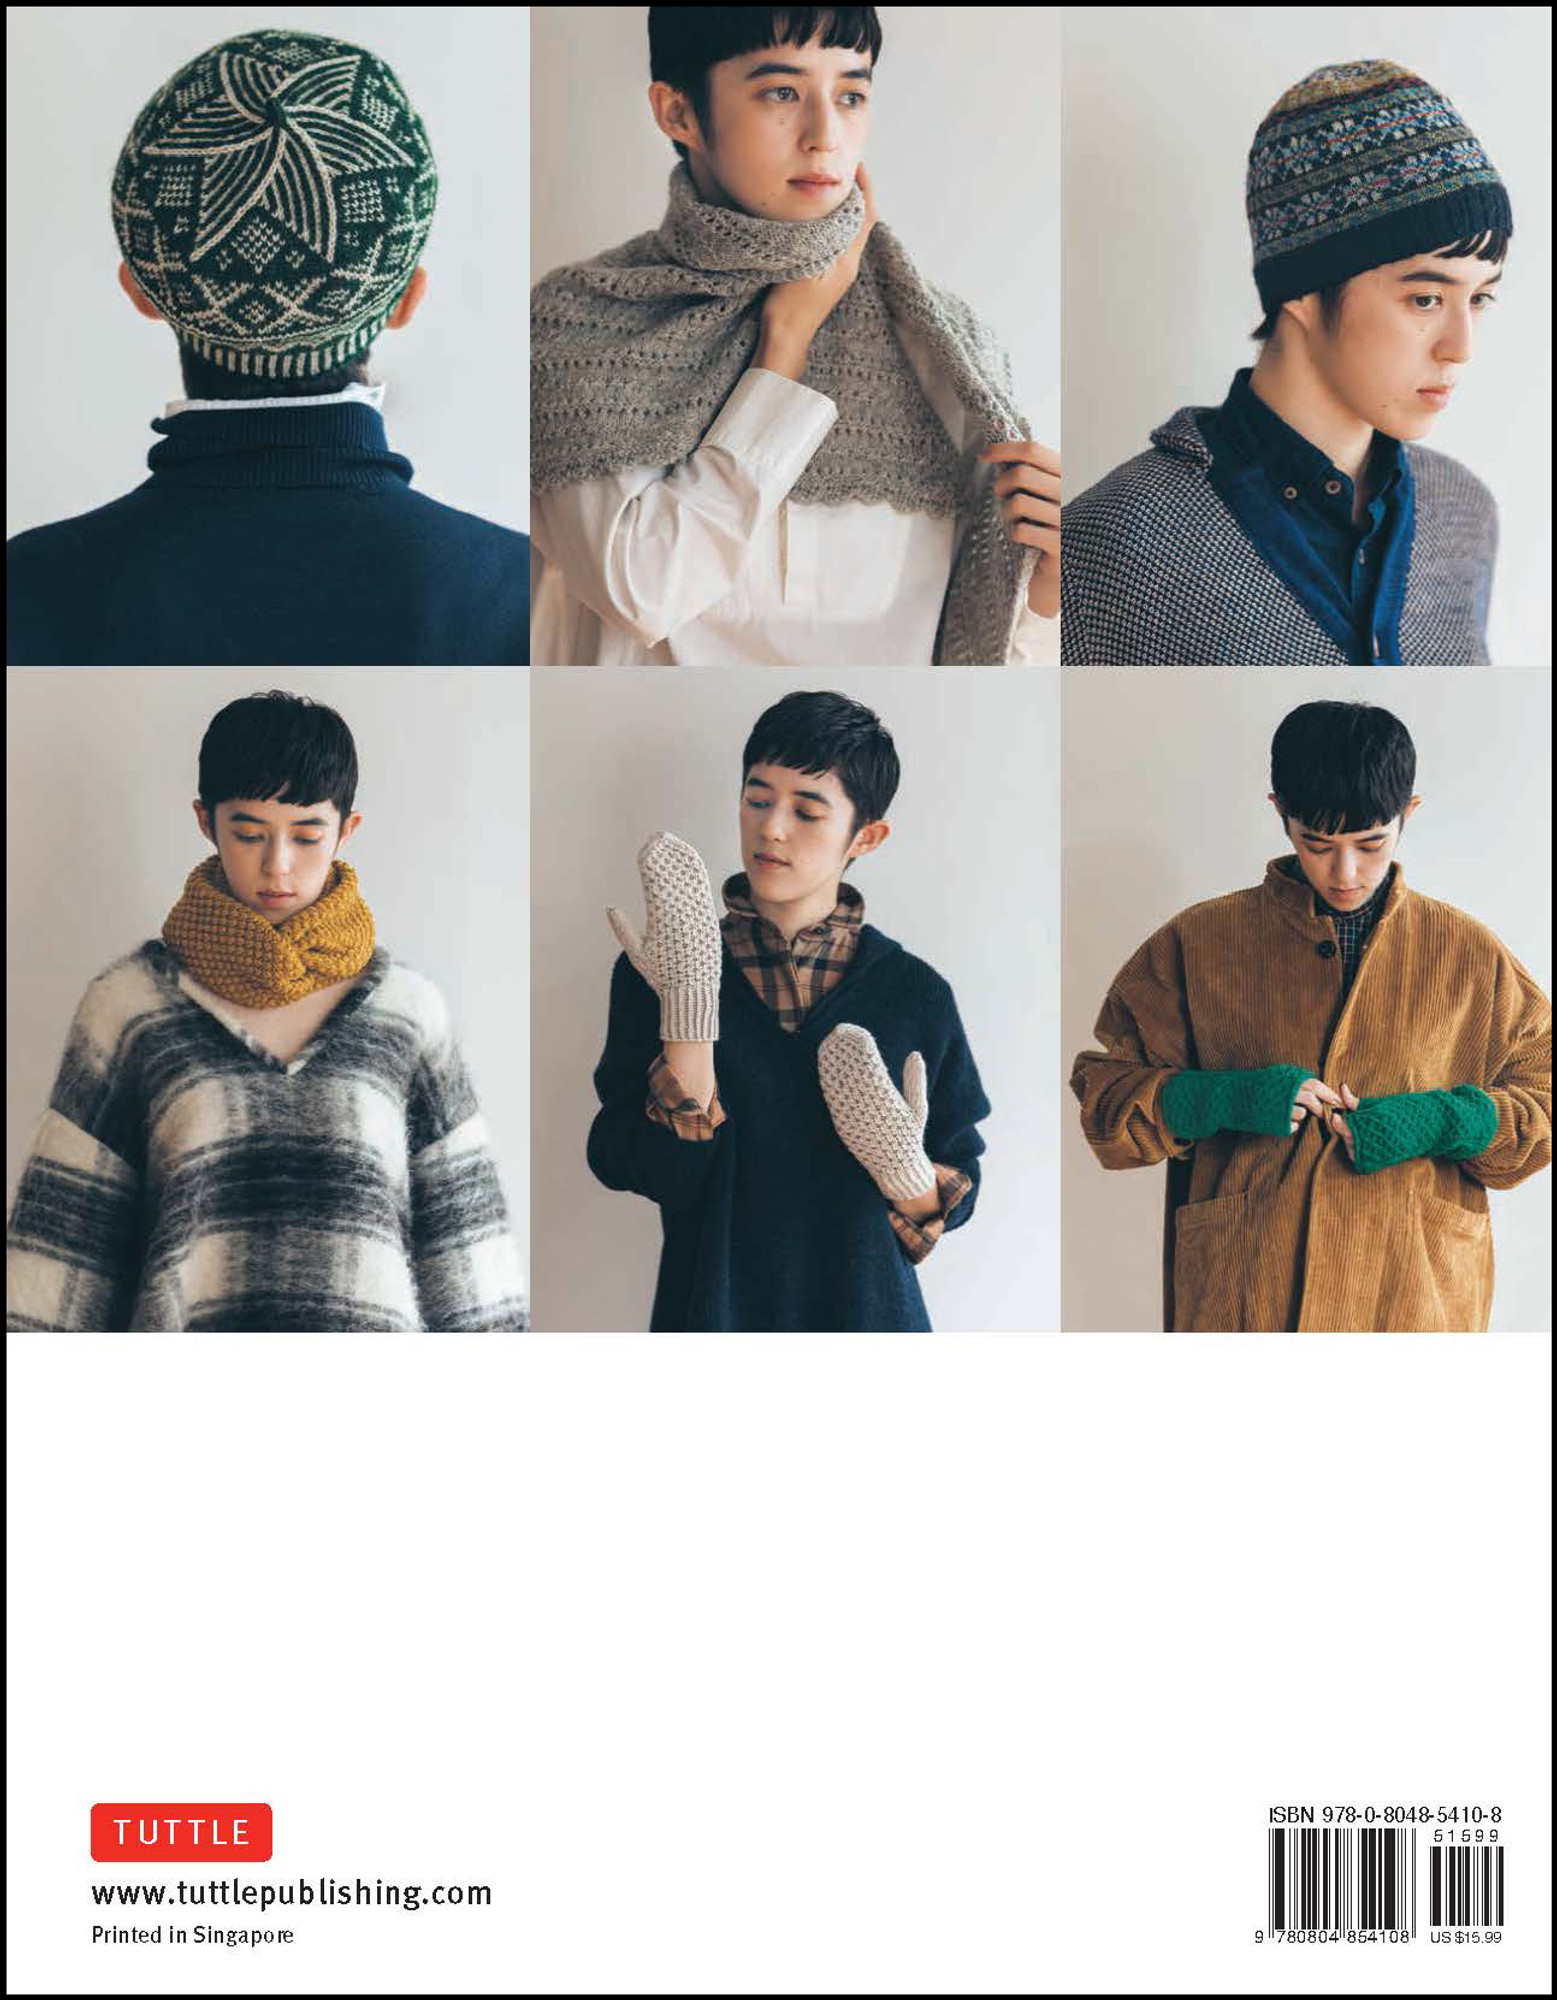 Small Knits: Casual & Chic Japanese Style Accessories (9780804854108) -  Tuttle Publishing